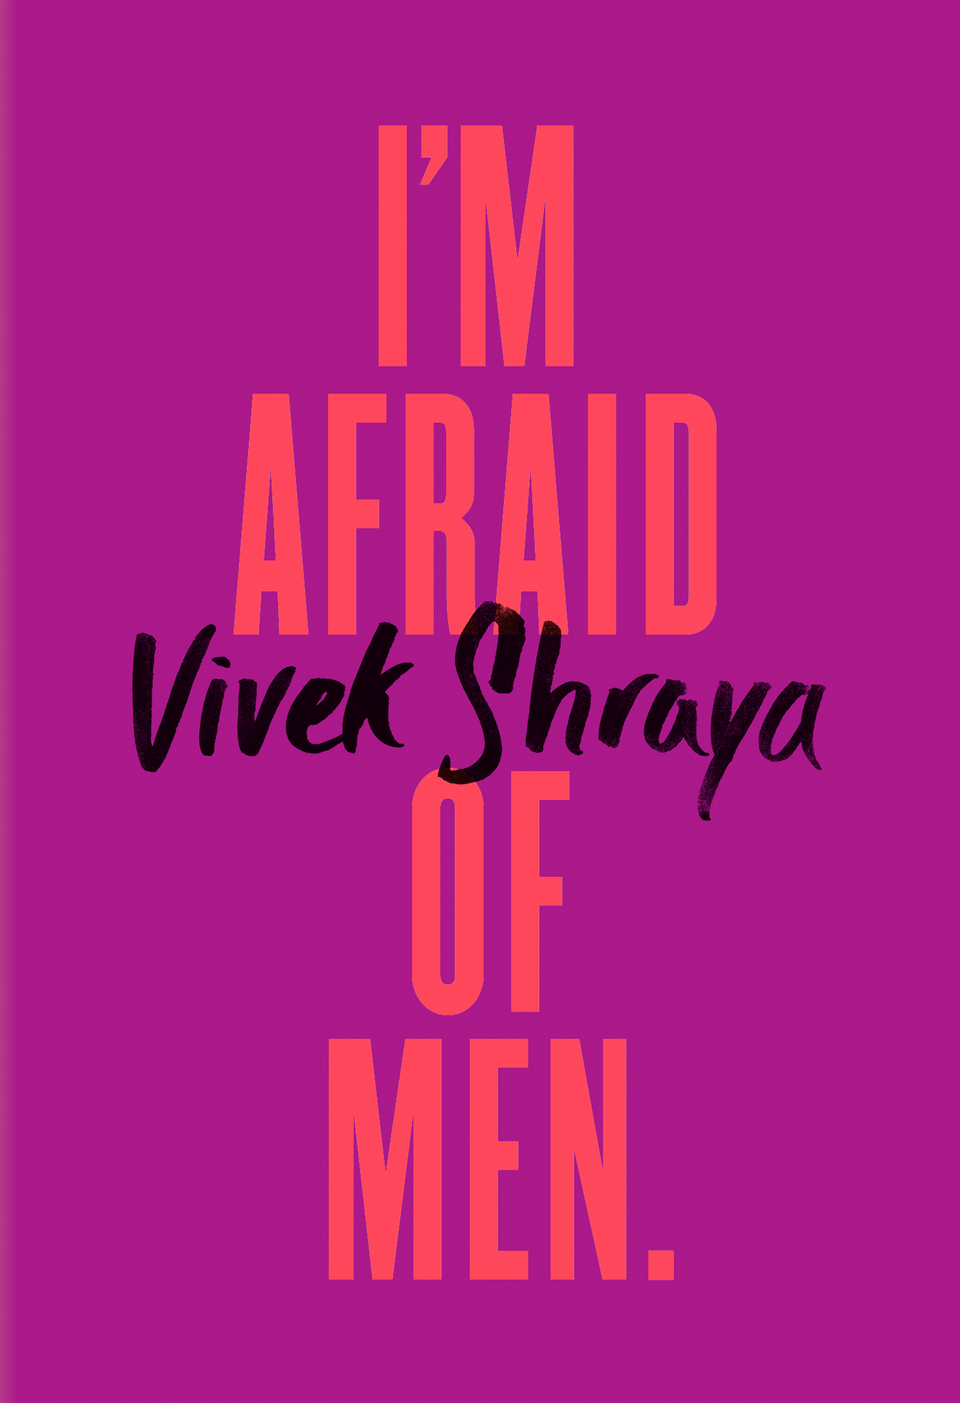 A purple book cover with bold orange text reading ‘I’m Afraid of Men’, and the author’s name written across it in black script, ‘Vivek Shraya’.